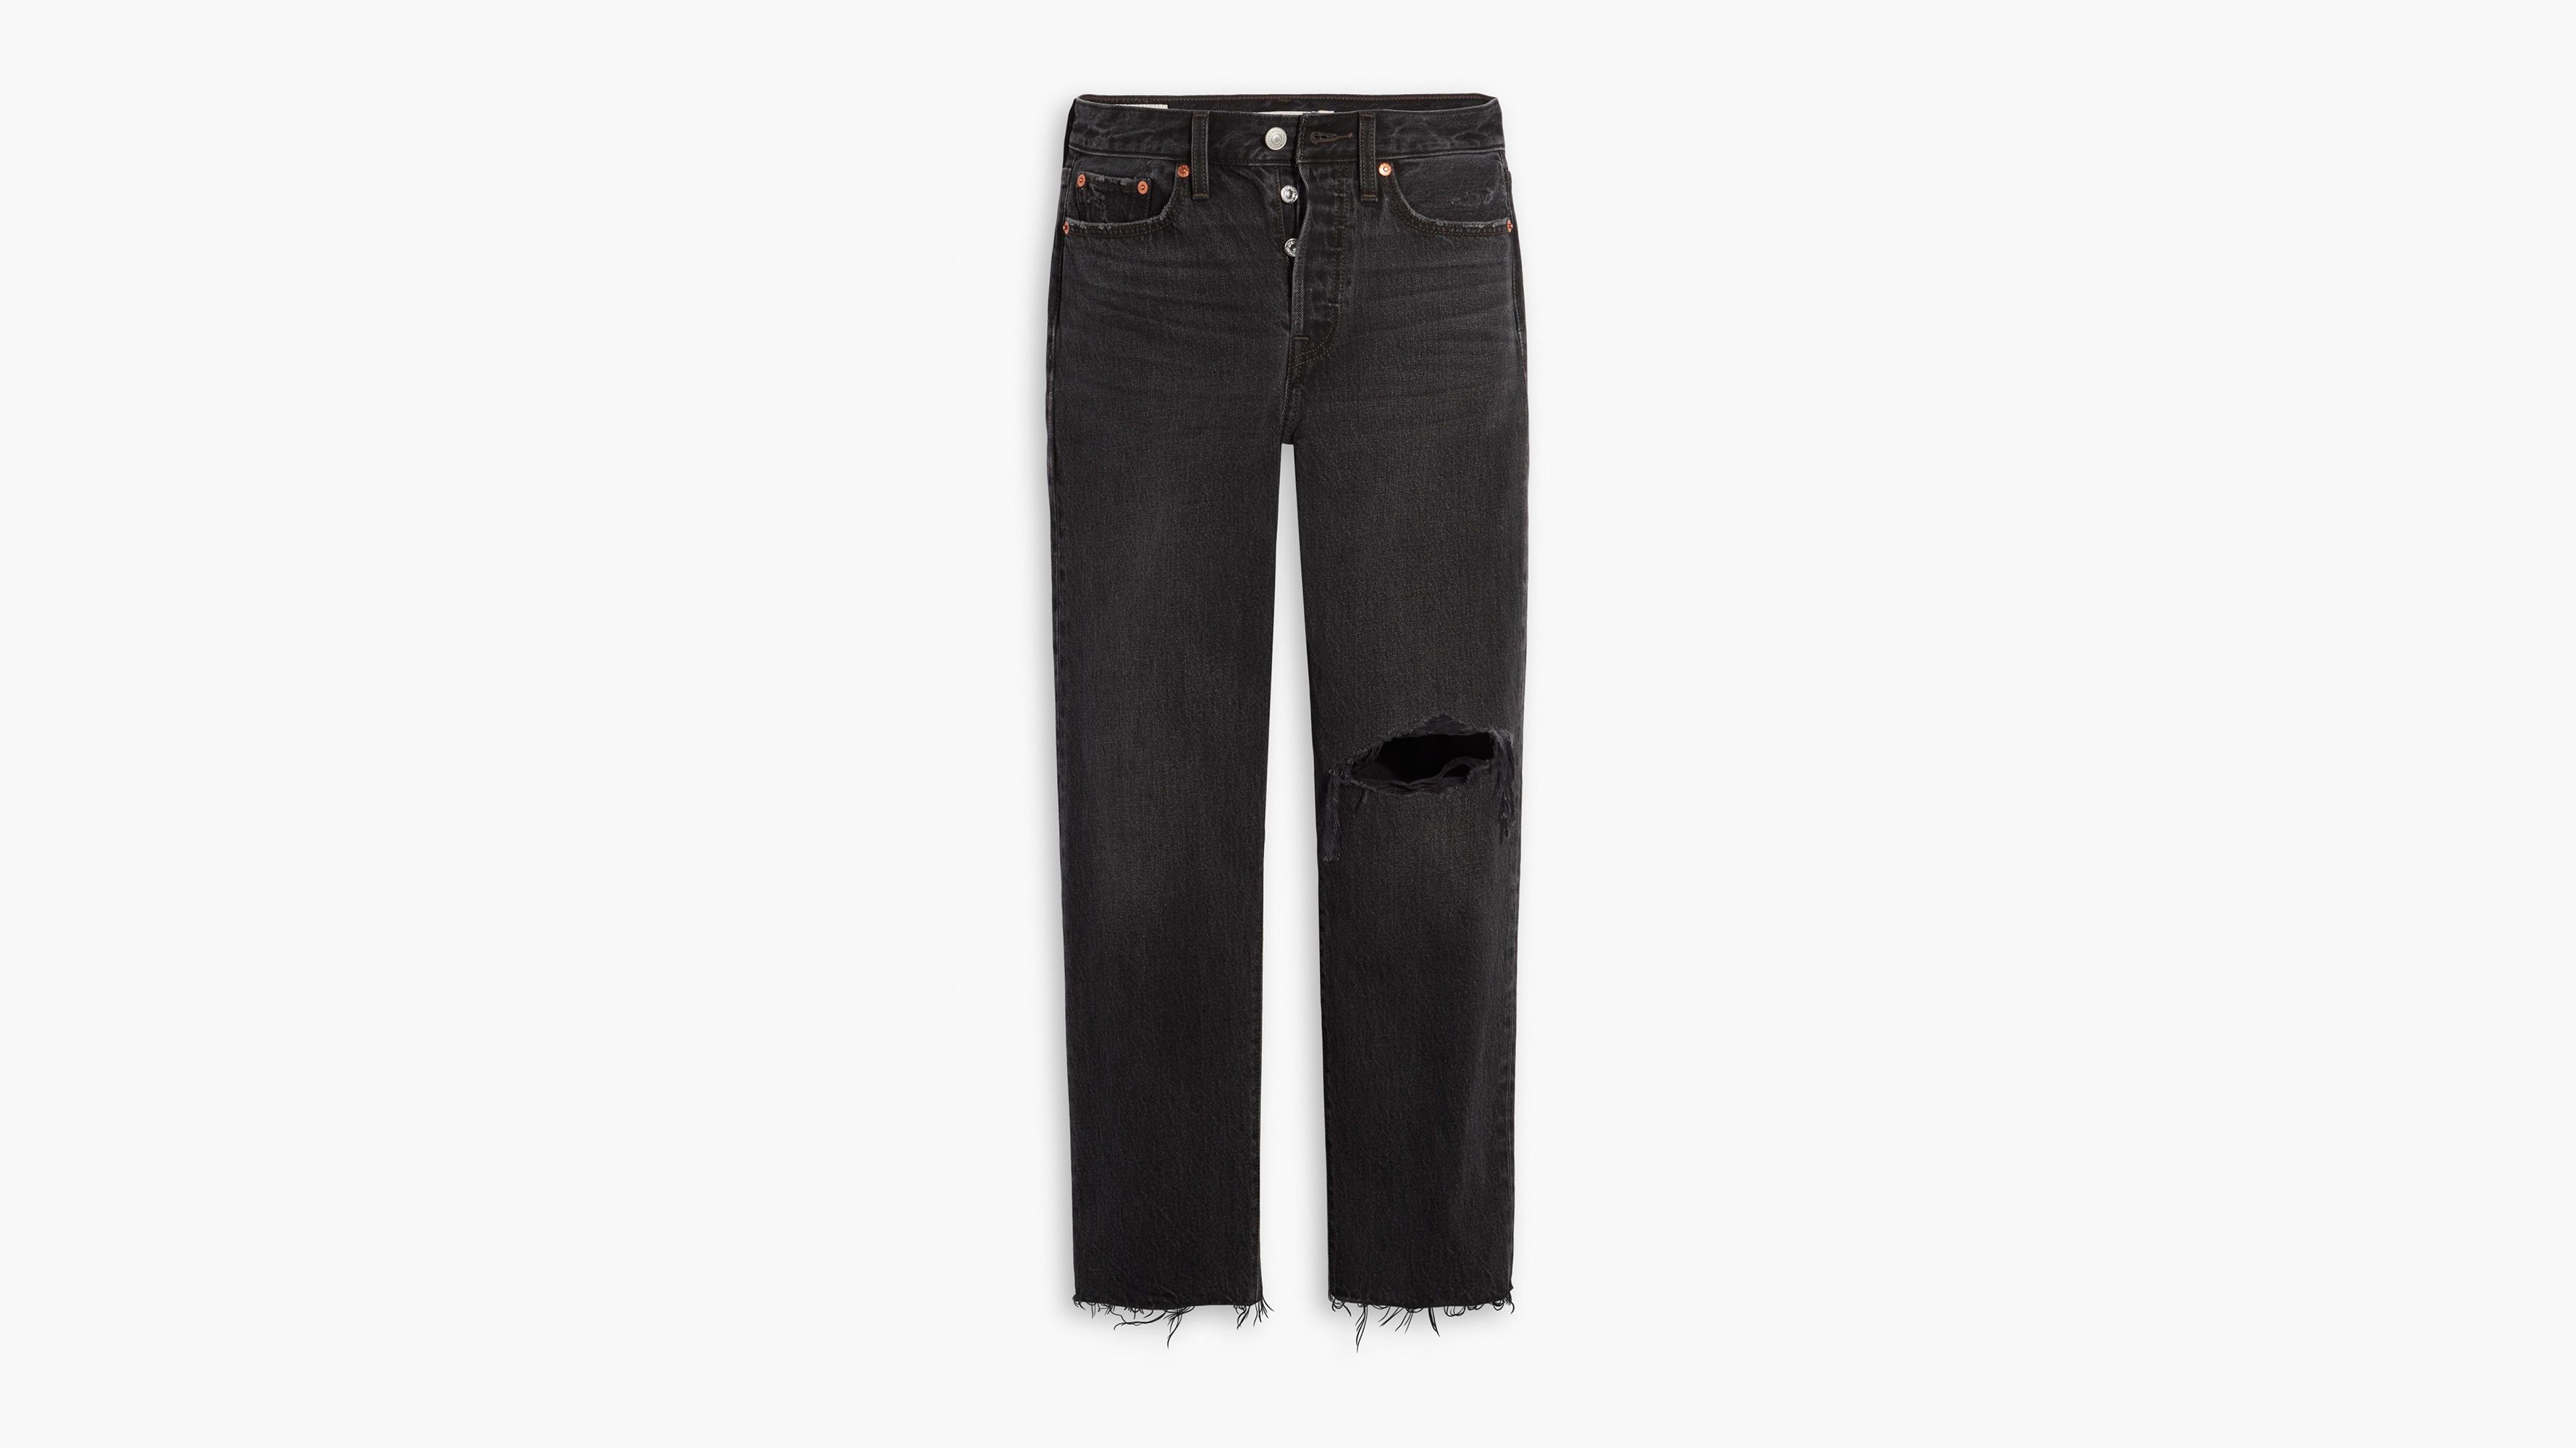 Wedgie Straight Fit Women's Jeans - Black | Levi's® US